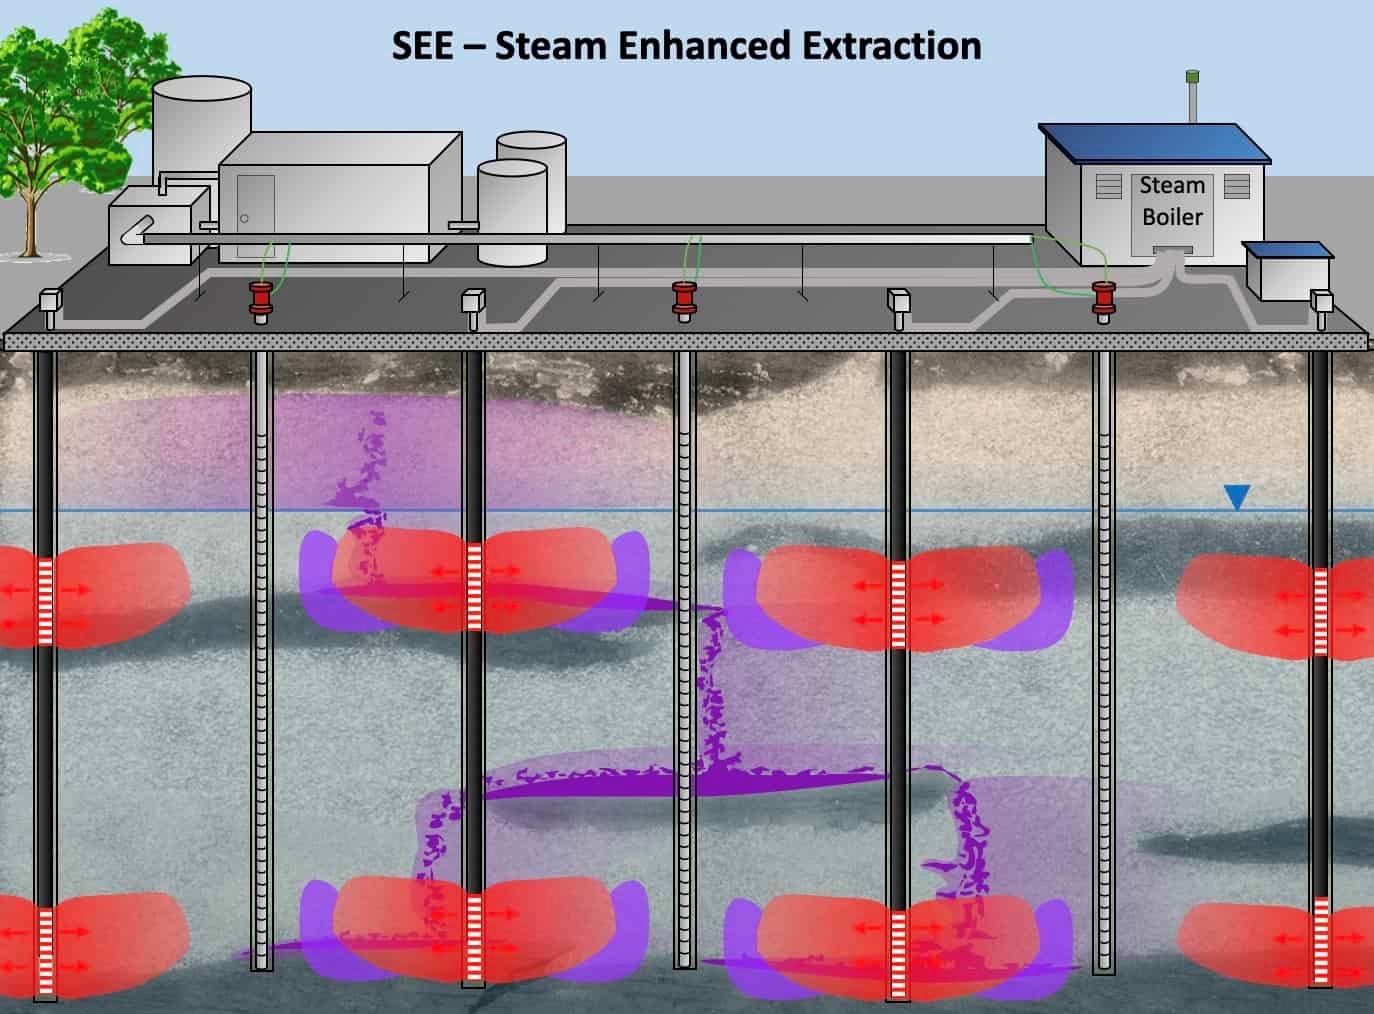 Steam Enhanced Extraction (SEE)